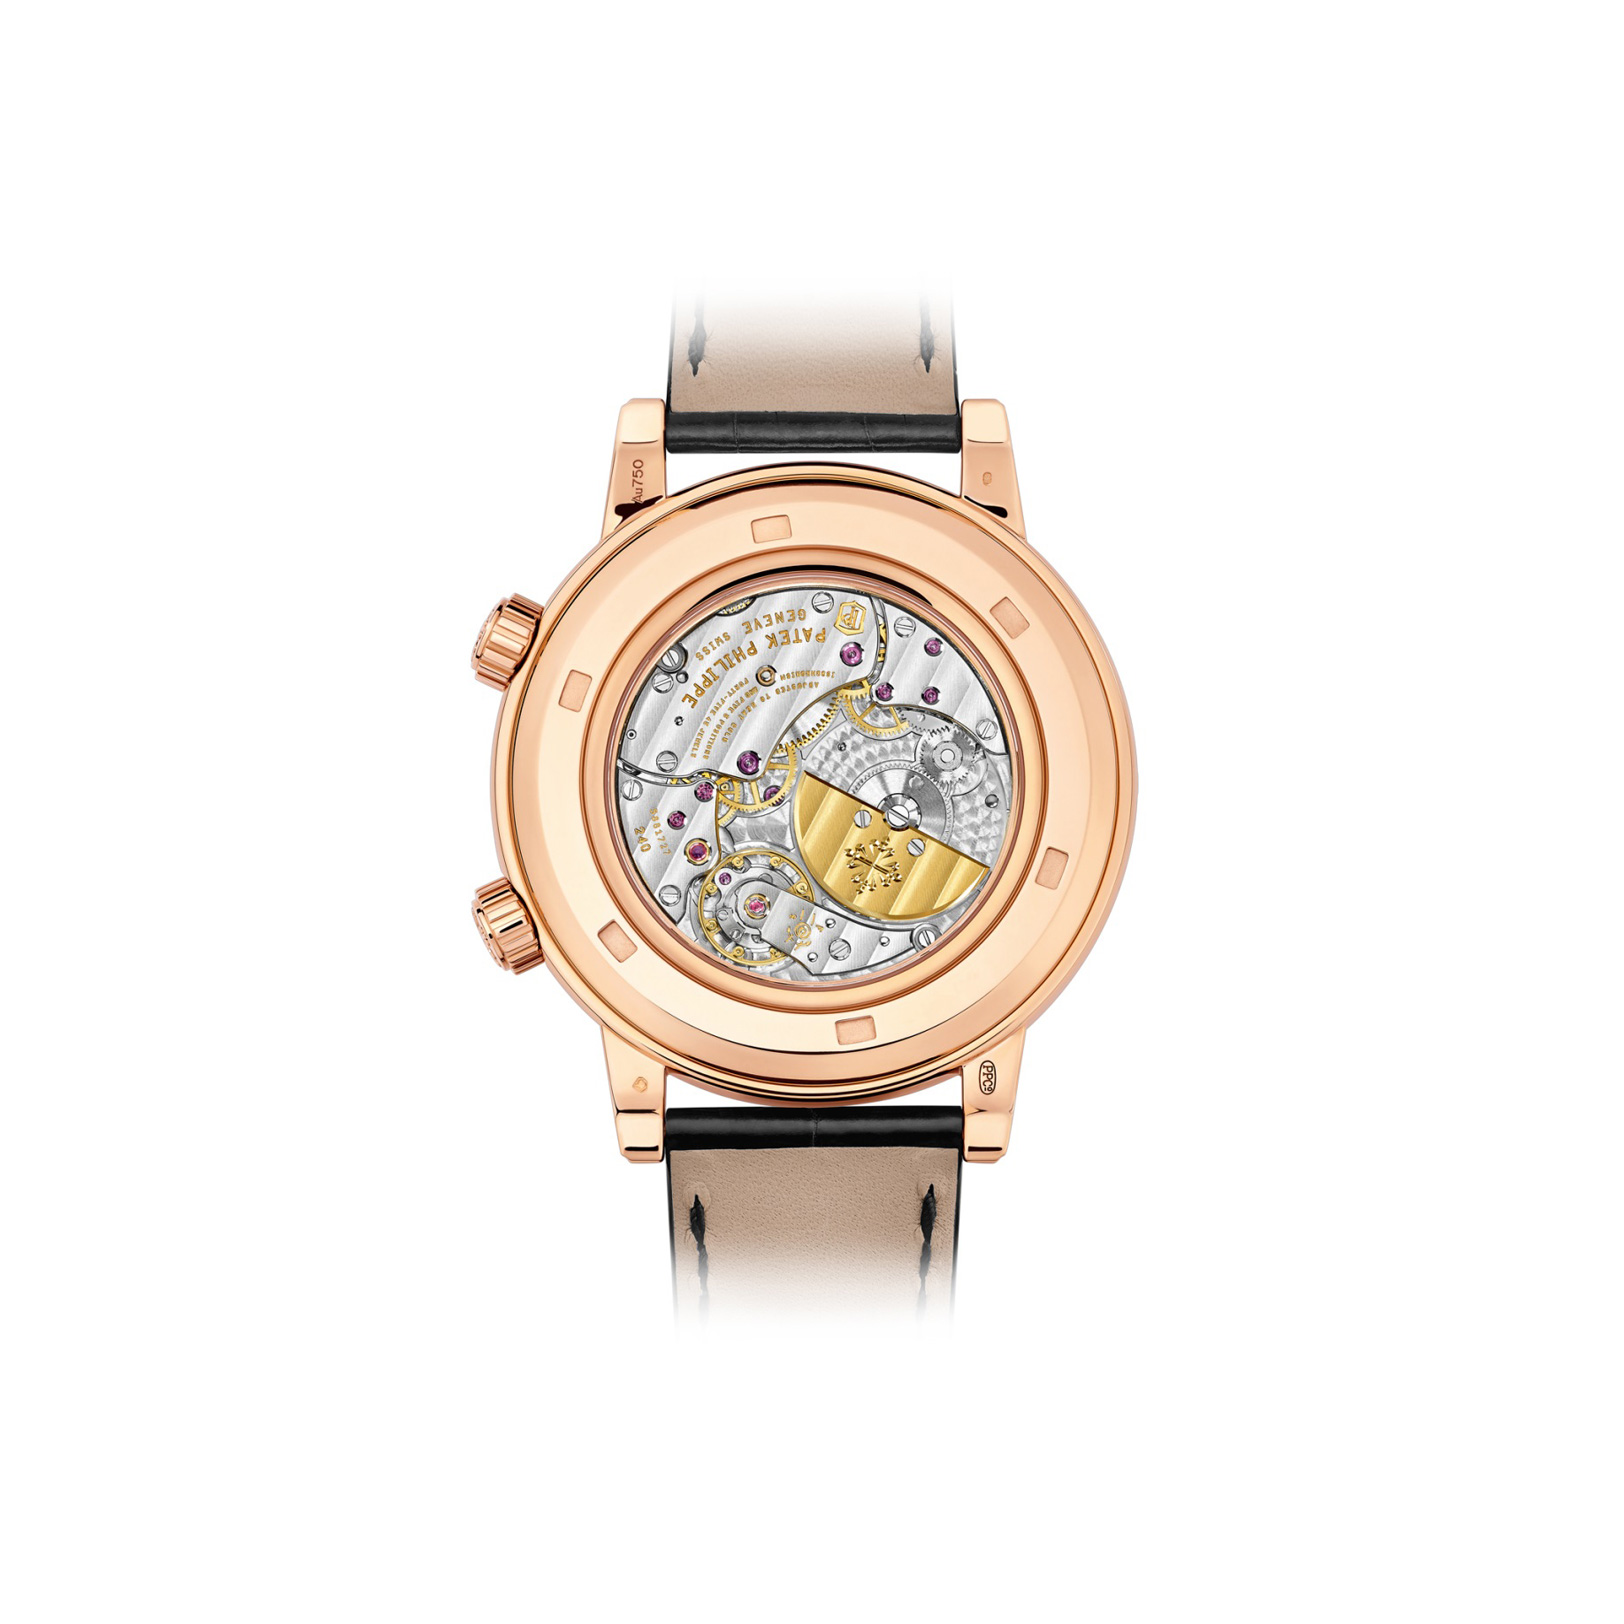 Grand Complications Rose Gold Celestial gallery 1